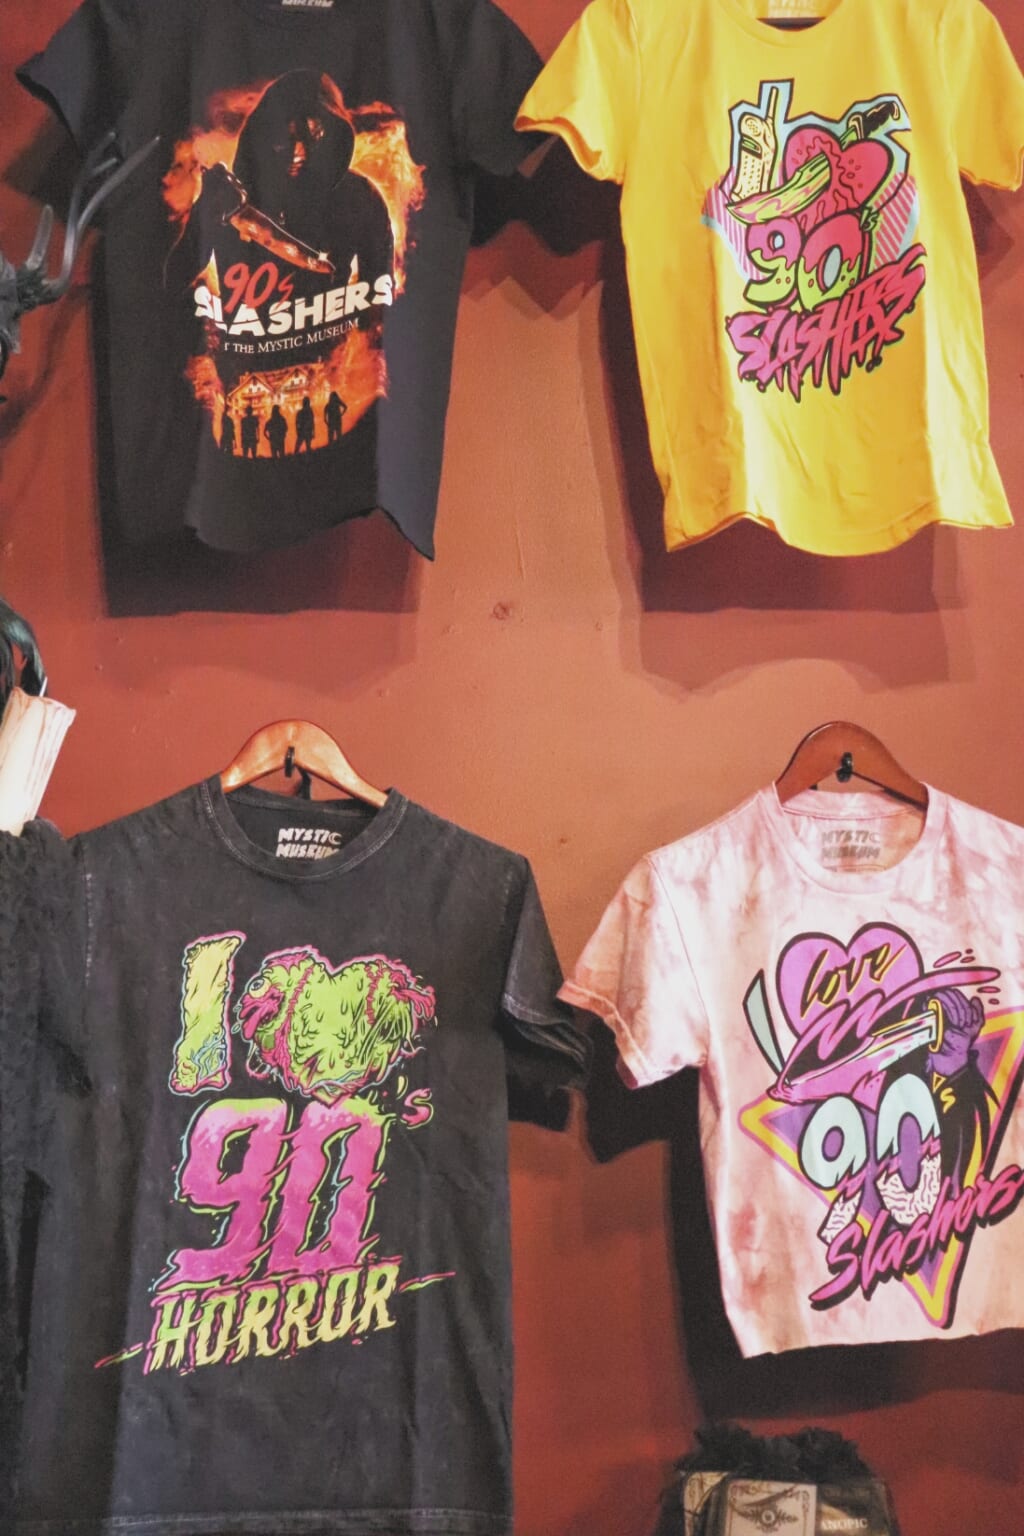 The Mystic Museum  90s slashers merch 1024x1536 - The Mystic Museum Brings A Totally Killer '90s Slashers Exhibit to Los Angeles